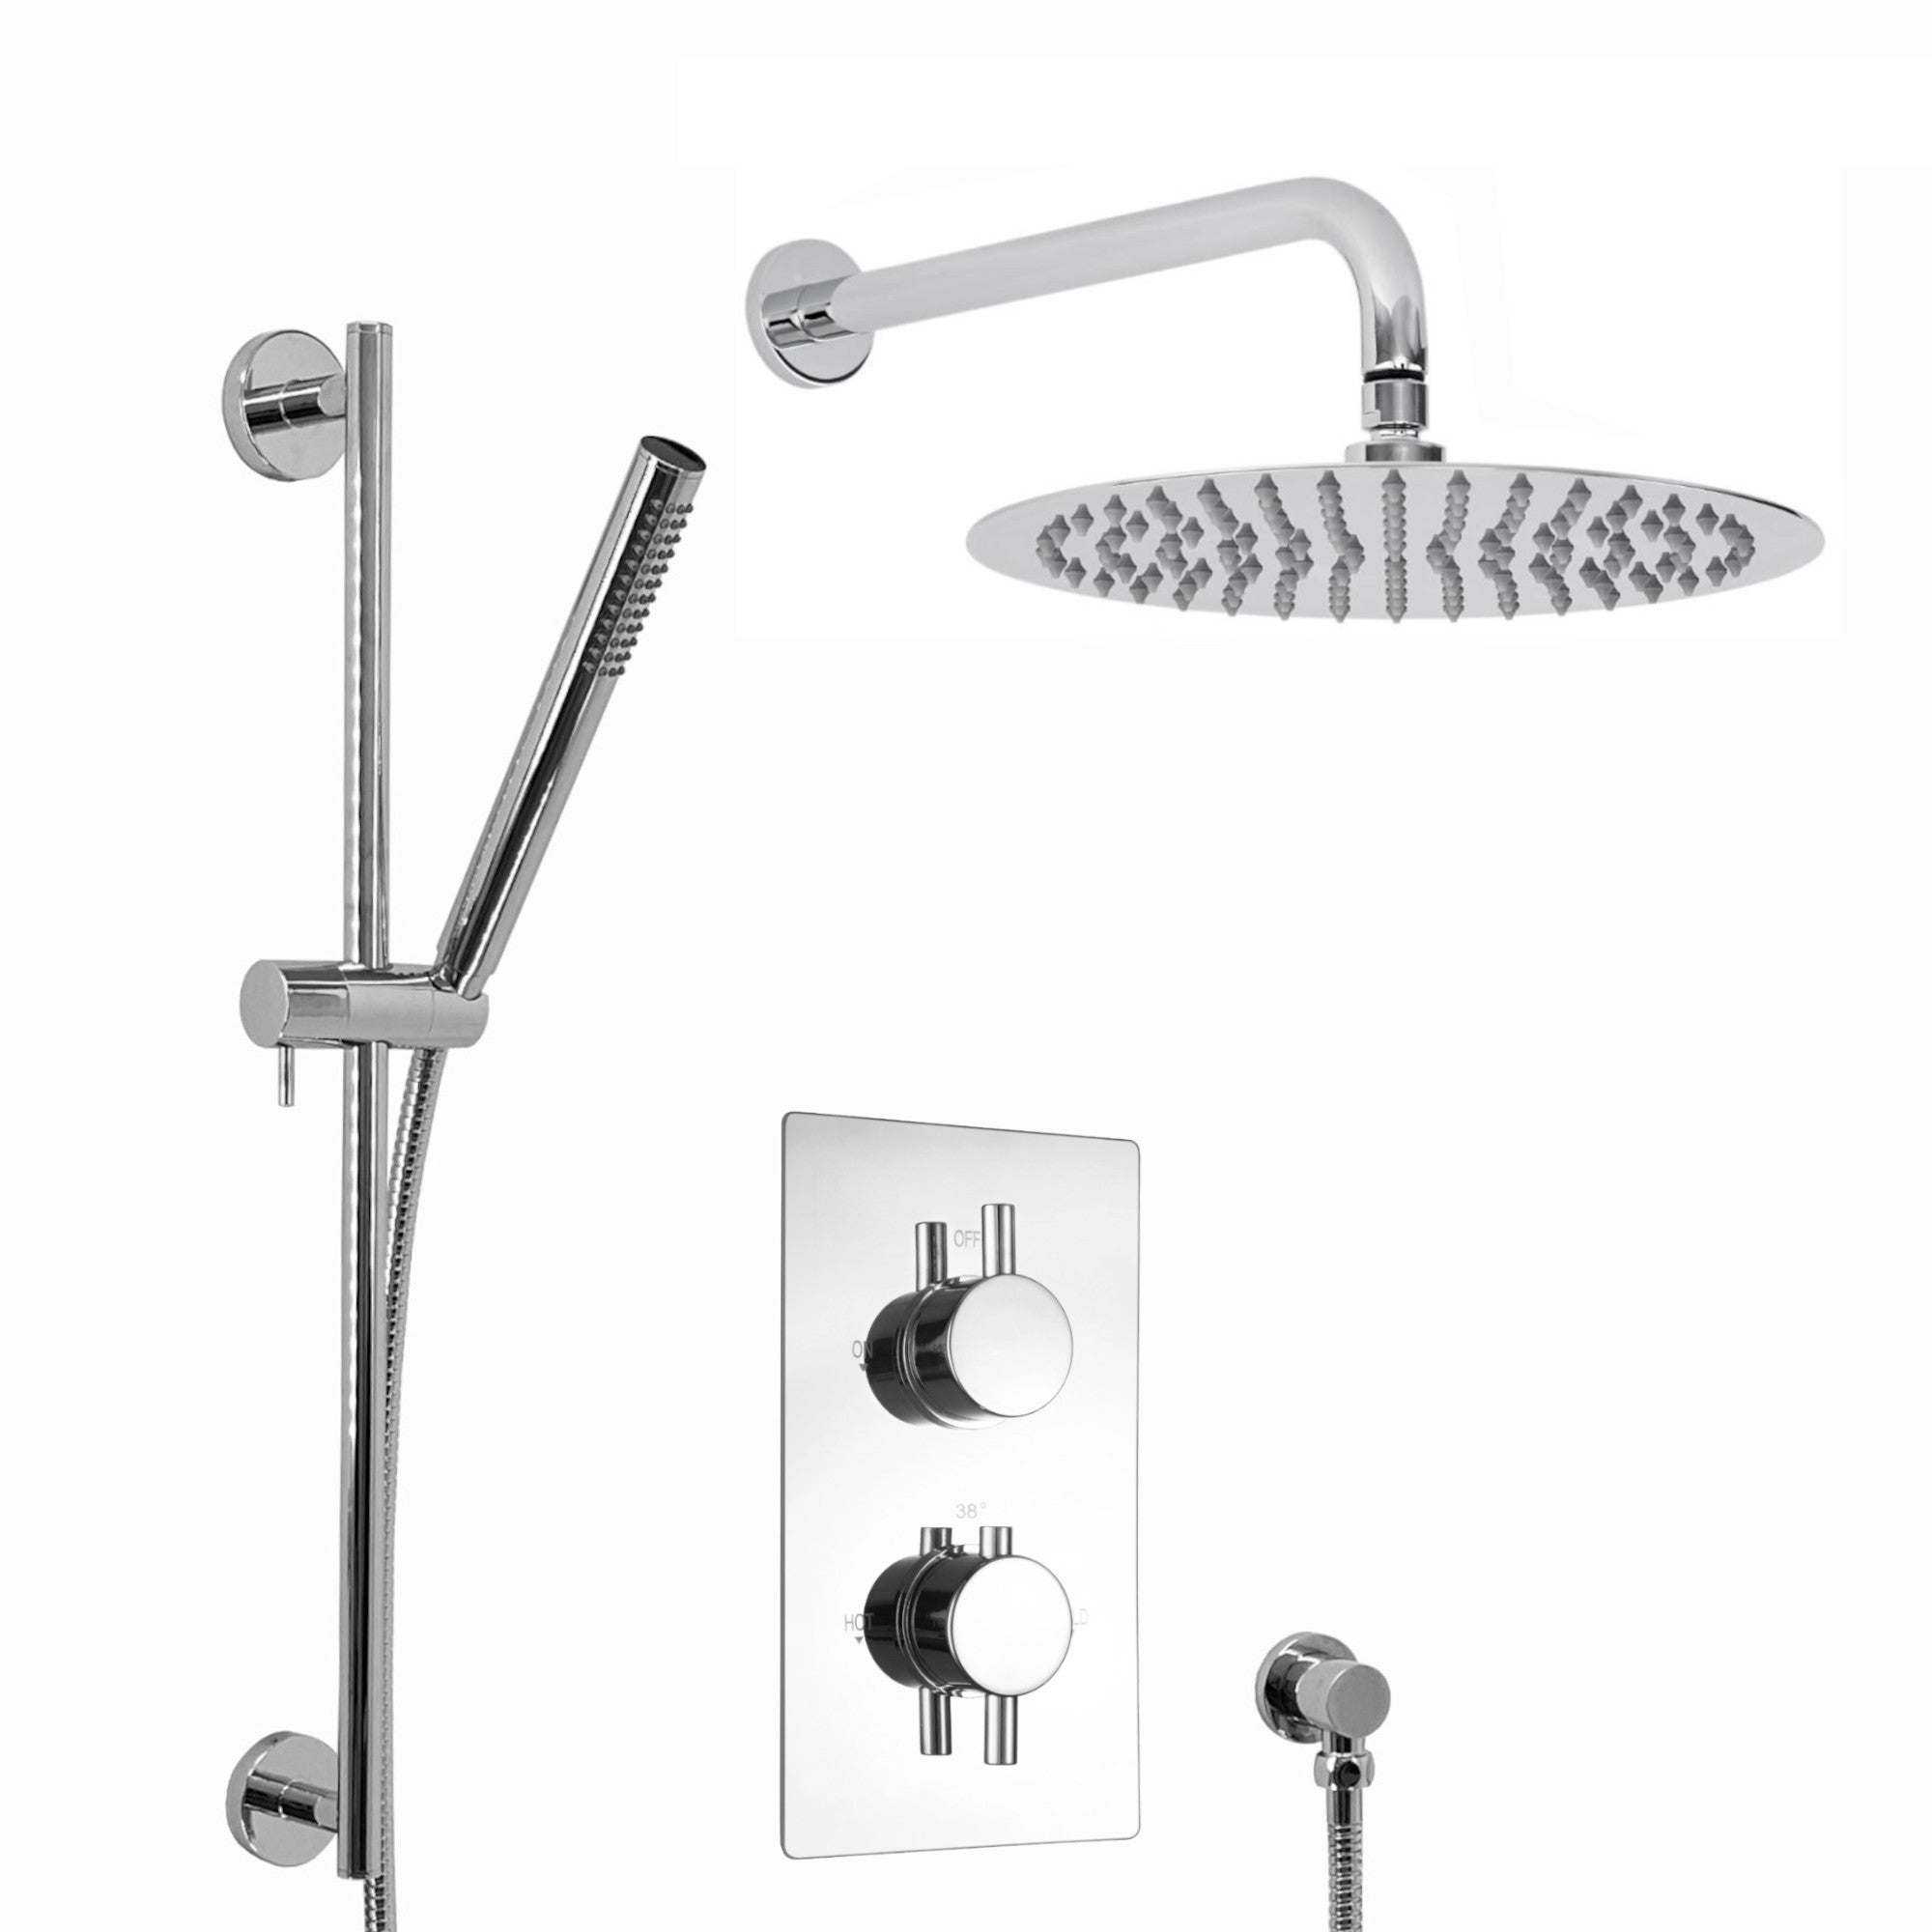 Venice Contemporary Round Concealed Thermostatic Shower Set Incl. Twin Valve, Wall Fixed 8" Shower Head, Slider Rail Kit - Chrome (2 Outlet)